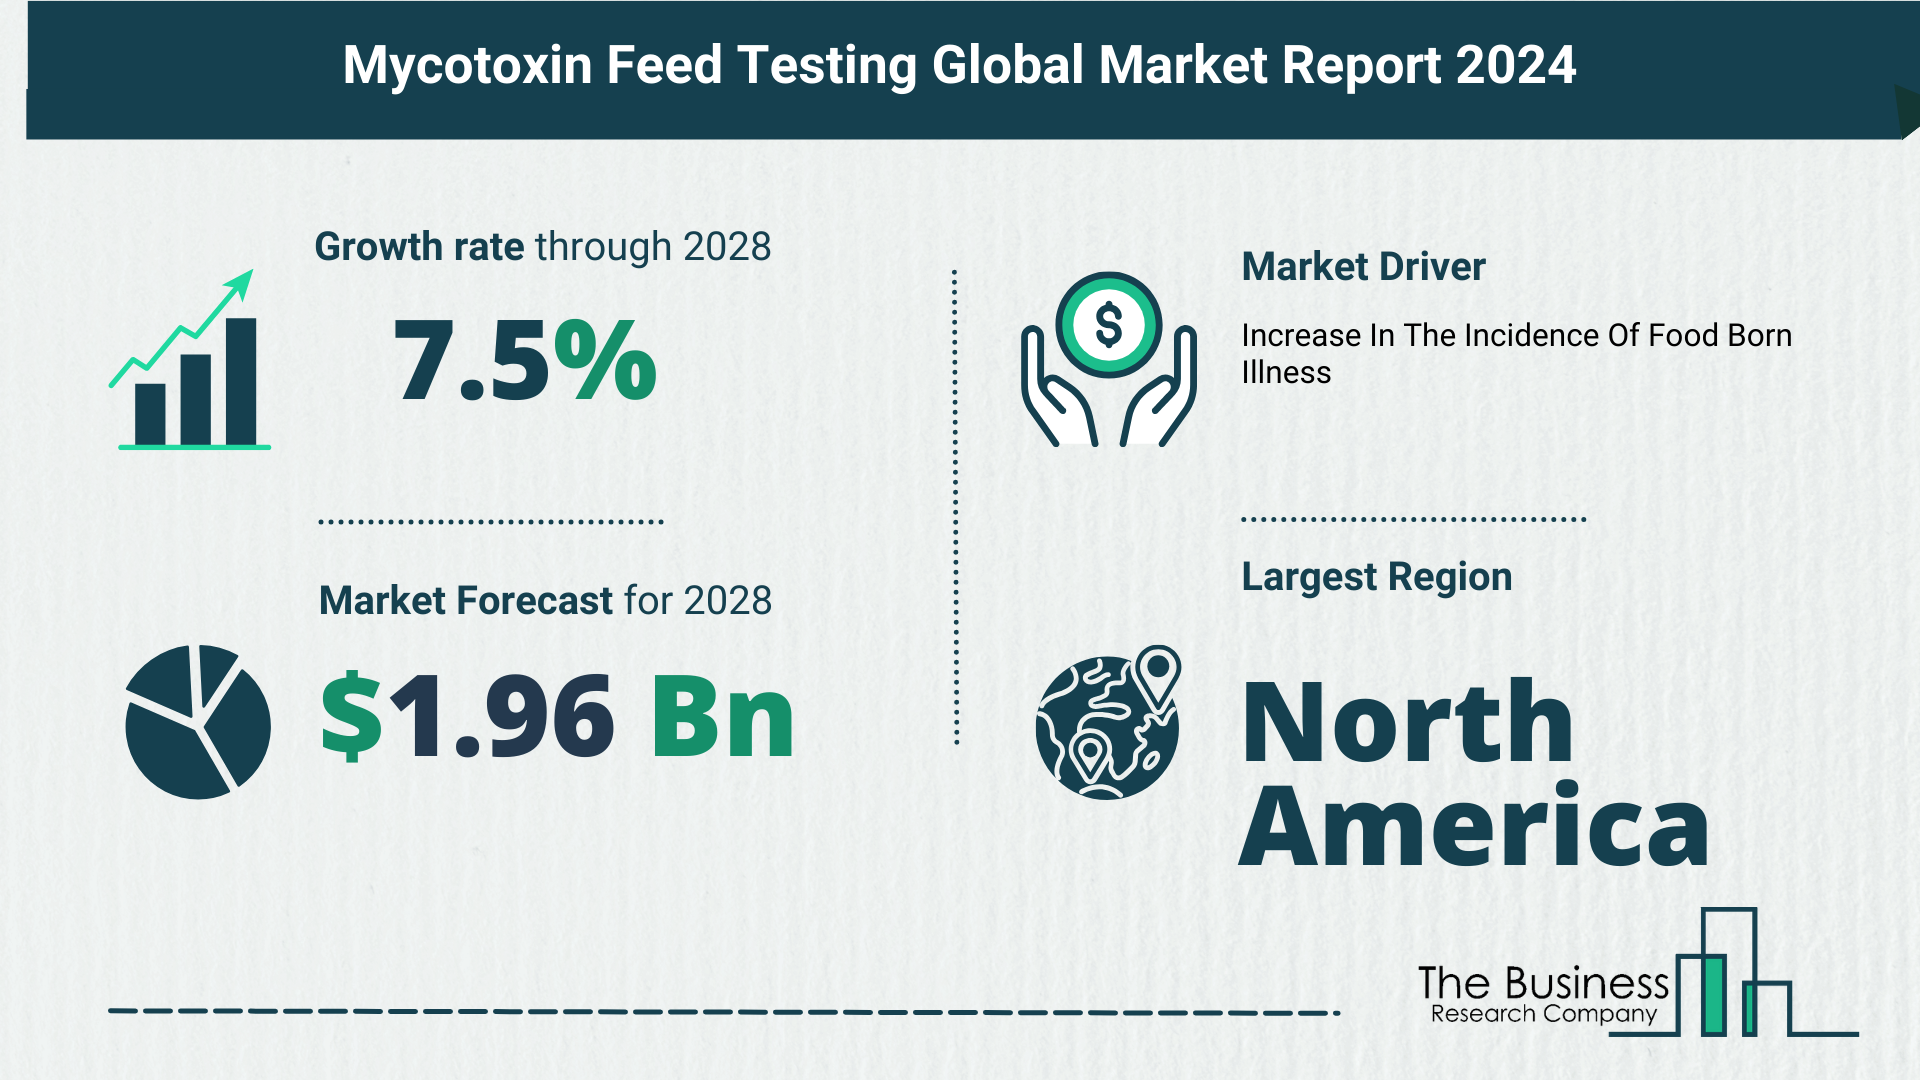 Global Mycotoxin Feed Testing Market Overview 2024: Size, Drivers, And Trends